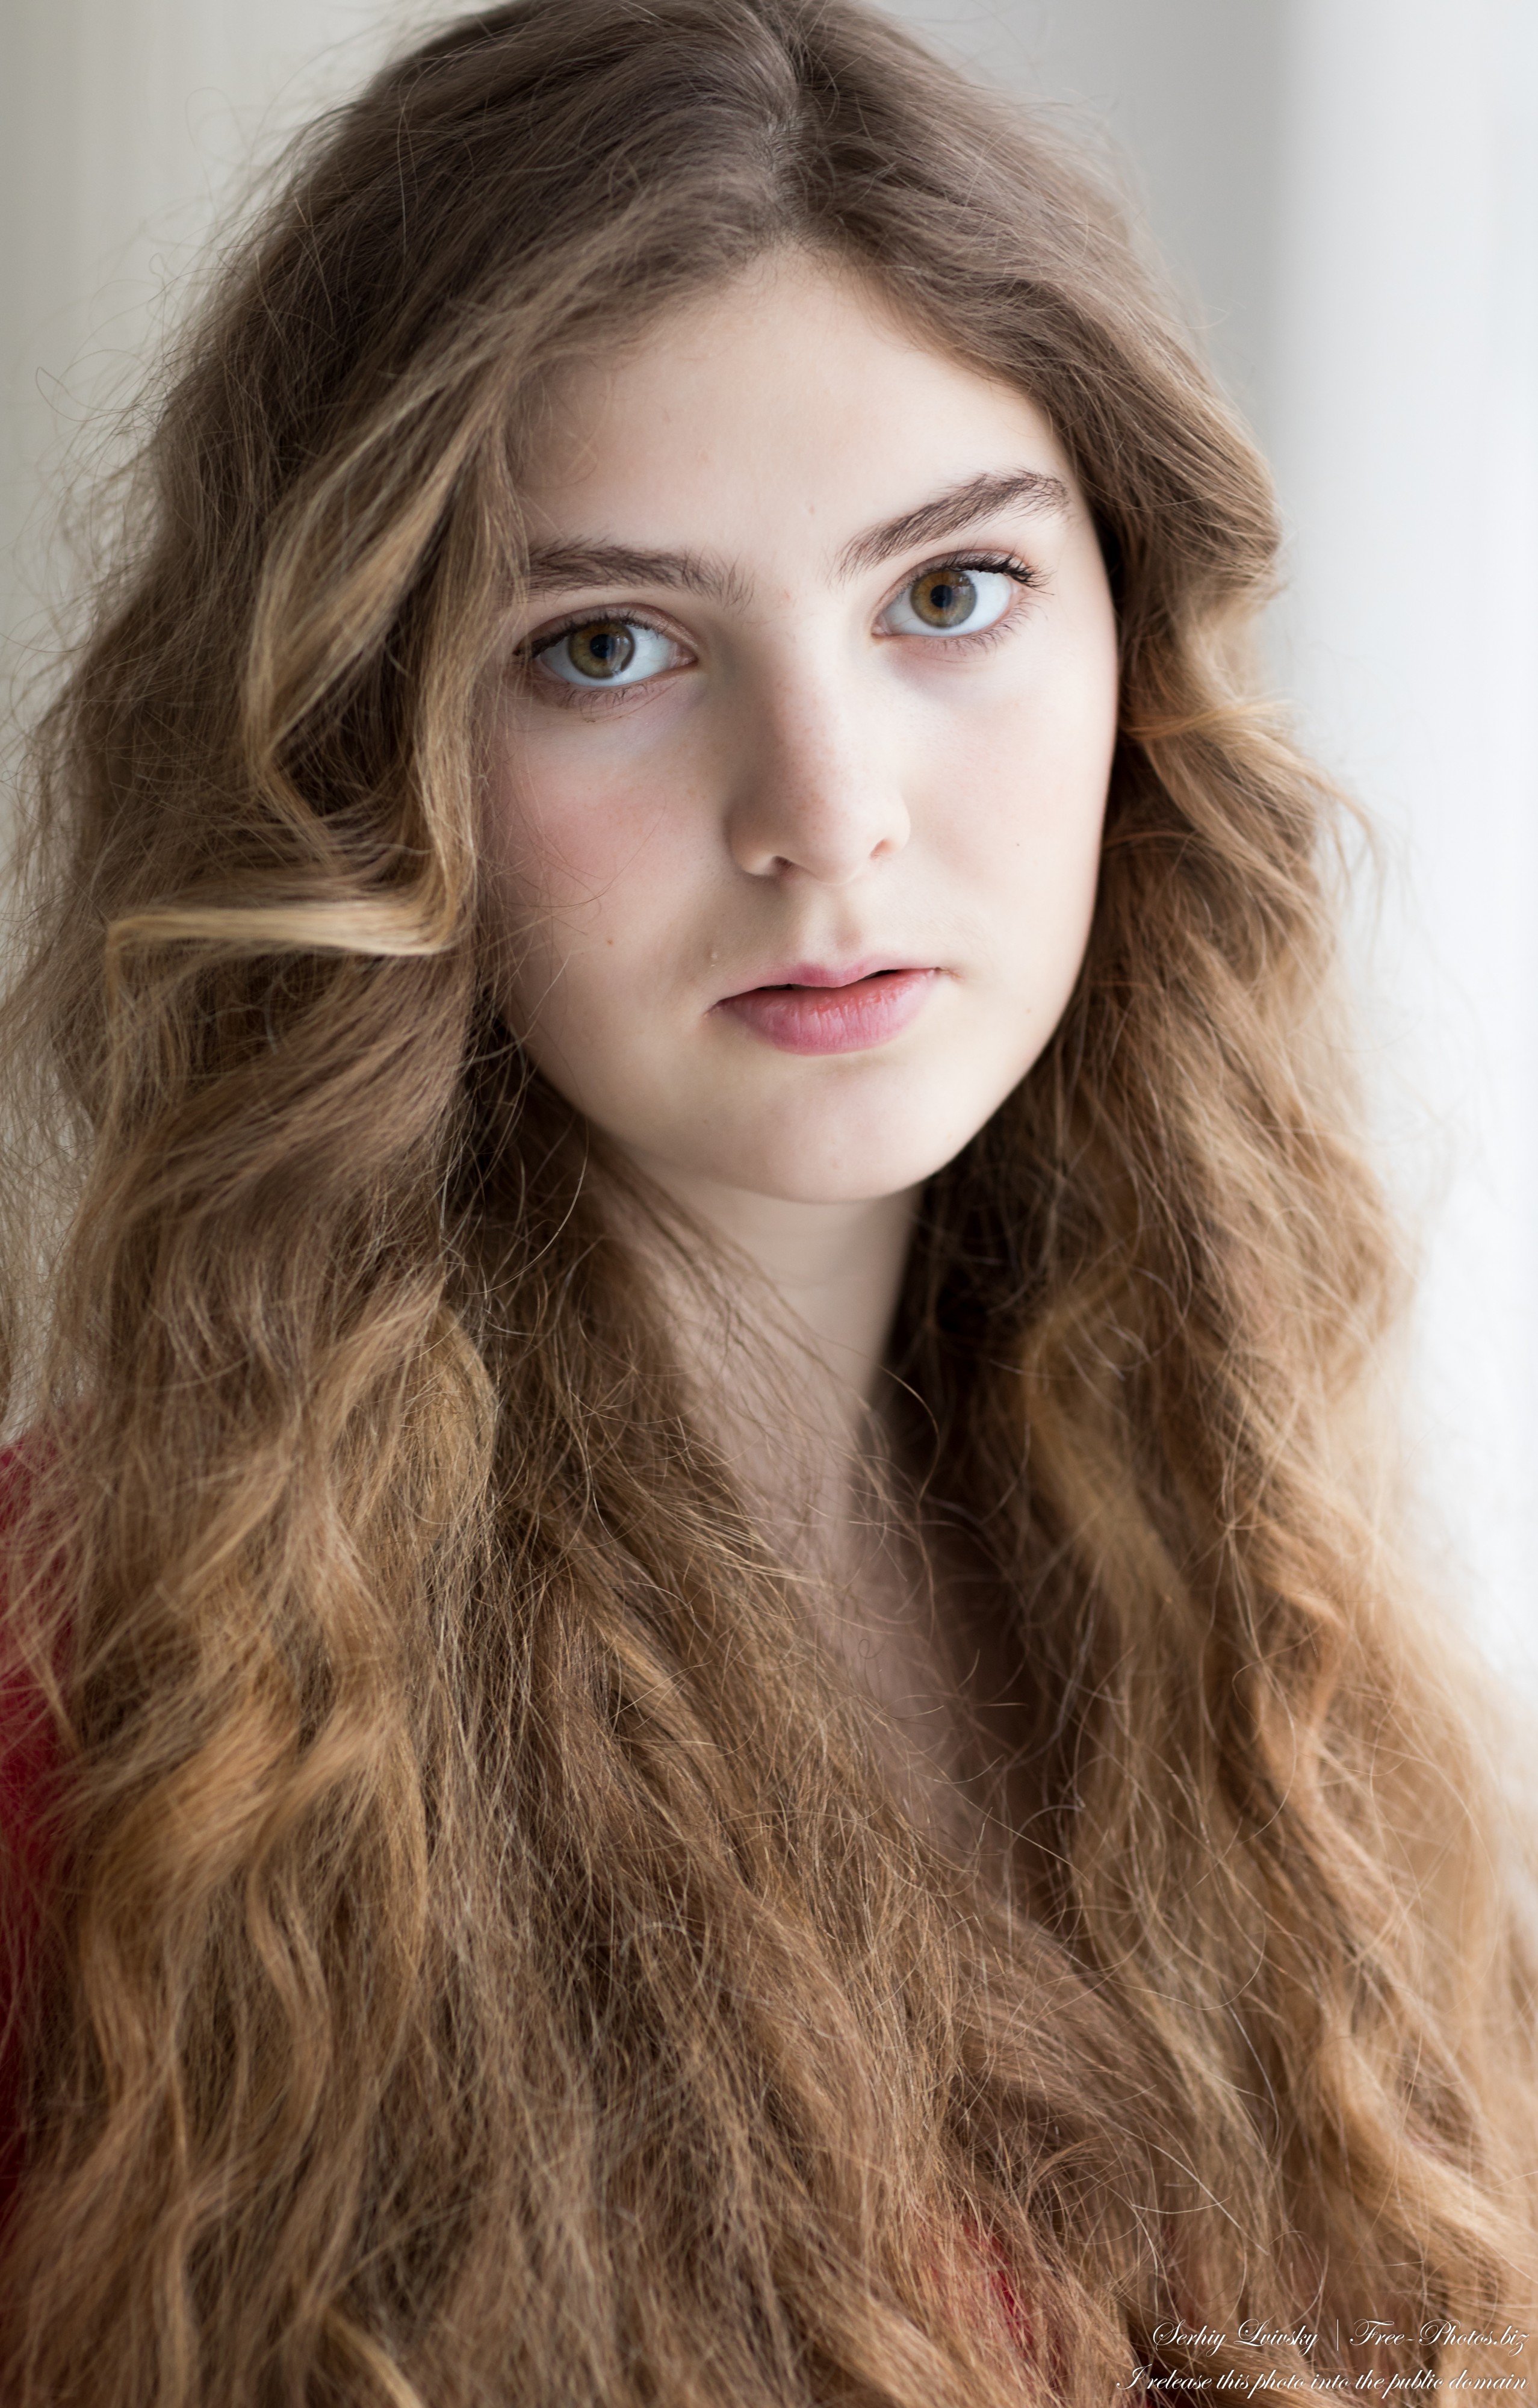 Kornelia - a 15-year-old girl with curly hair photographed in March 2023 by Serhiy Lvivsky, picture 27